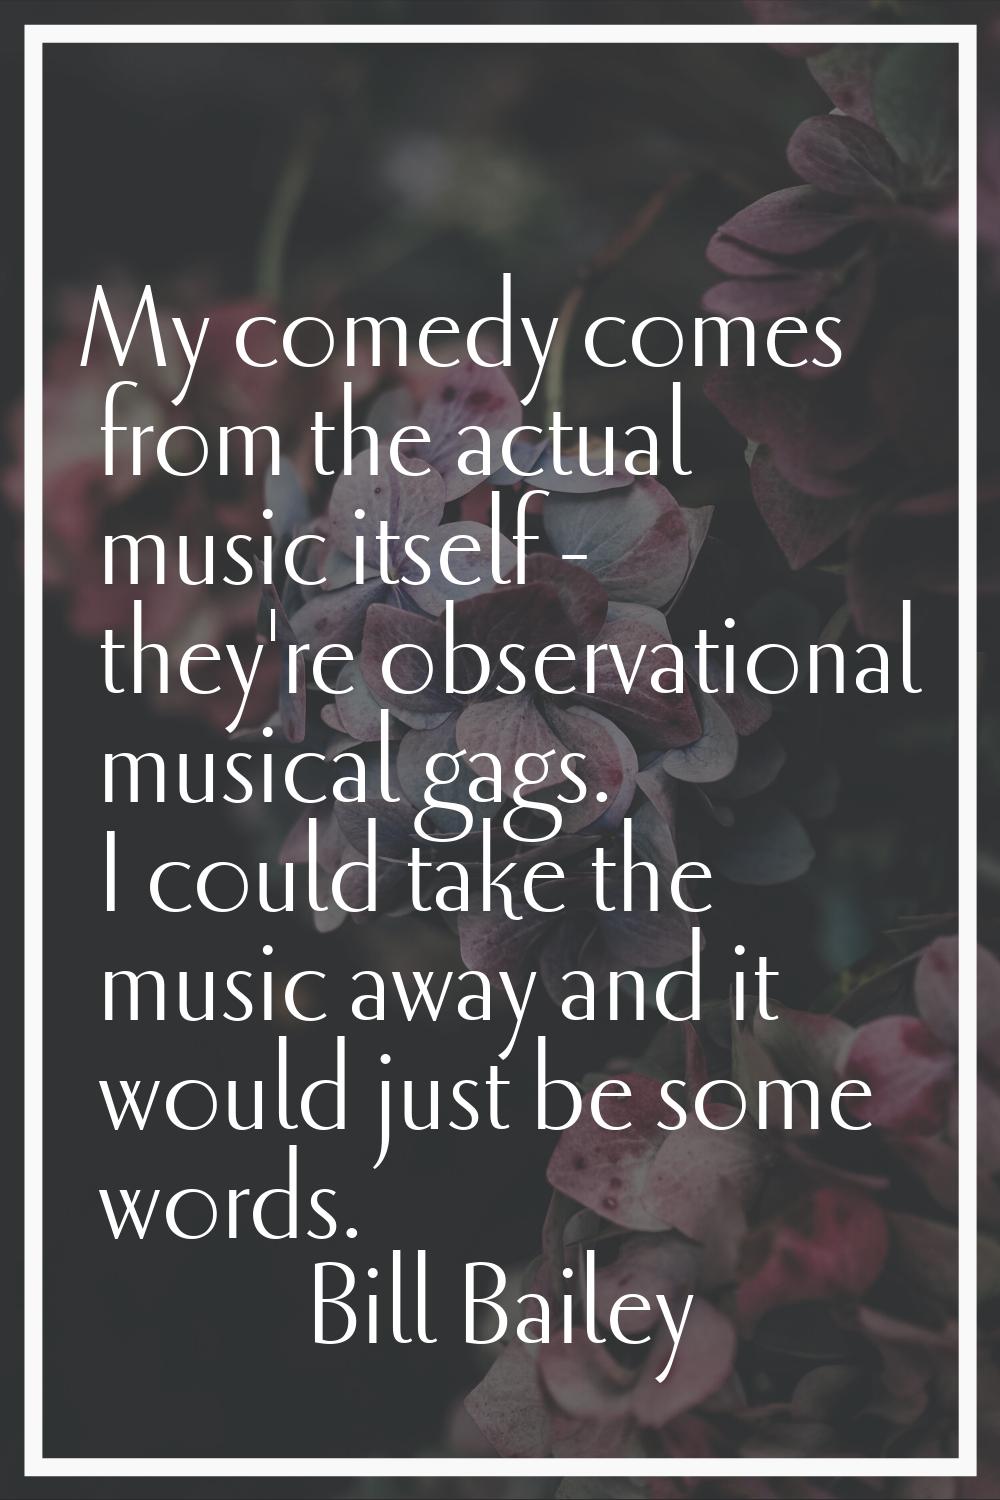 My comedy comes from the actual music itself - they're observational musical gags. I could take the